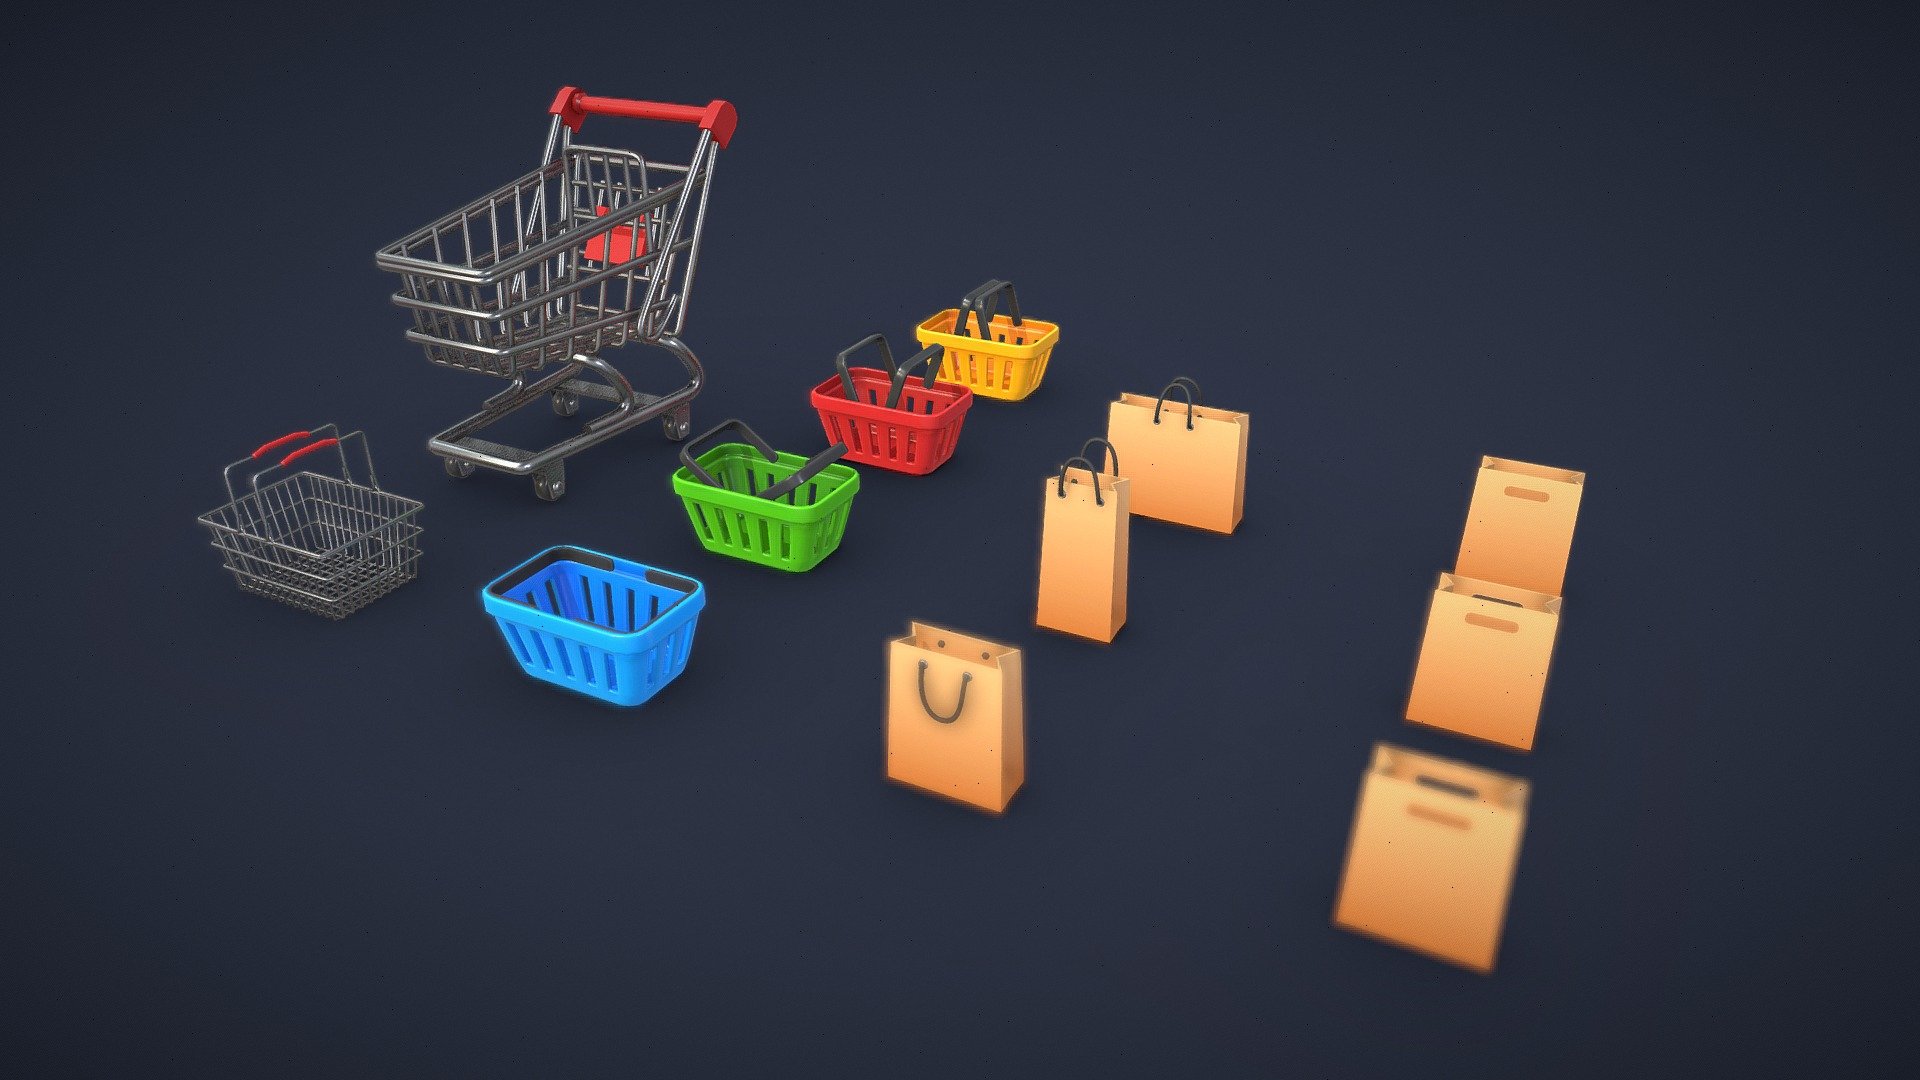 Pack of 5 different models for shopping

Pack include:




4 Shopping Basket (Blue, Green, Red, Yellow) - 1 408 tris

Shopping Cart - 6 120 tris

Metal Shopping Basket - 6 160 tris

Shopping Bag - 760 tris

Paper Bag - 244 tris

Diffuse, Normal, Roughness and Metalic textures

2048 x 2048 PNG textures

AR / VR / Mobile ready - Shopping Pack - Buy Royalty Free 3D model by Andrii Sedykh (@andriisedykh) 3d model